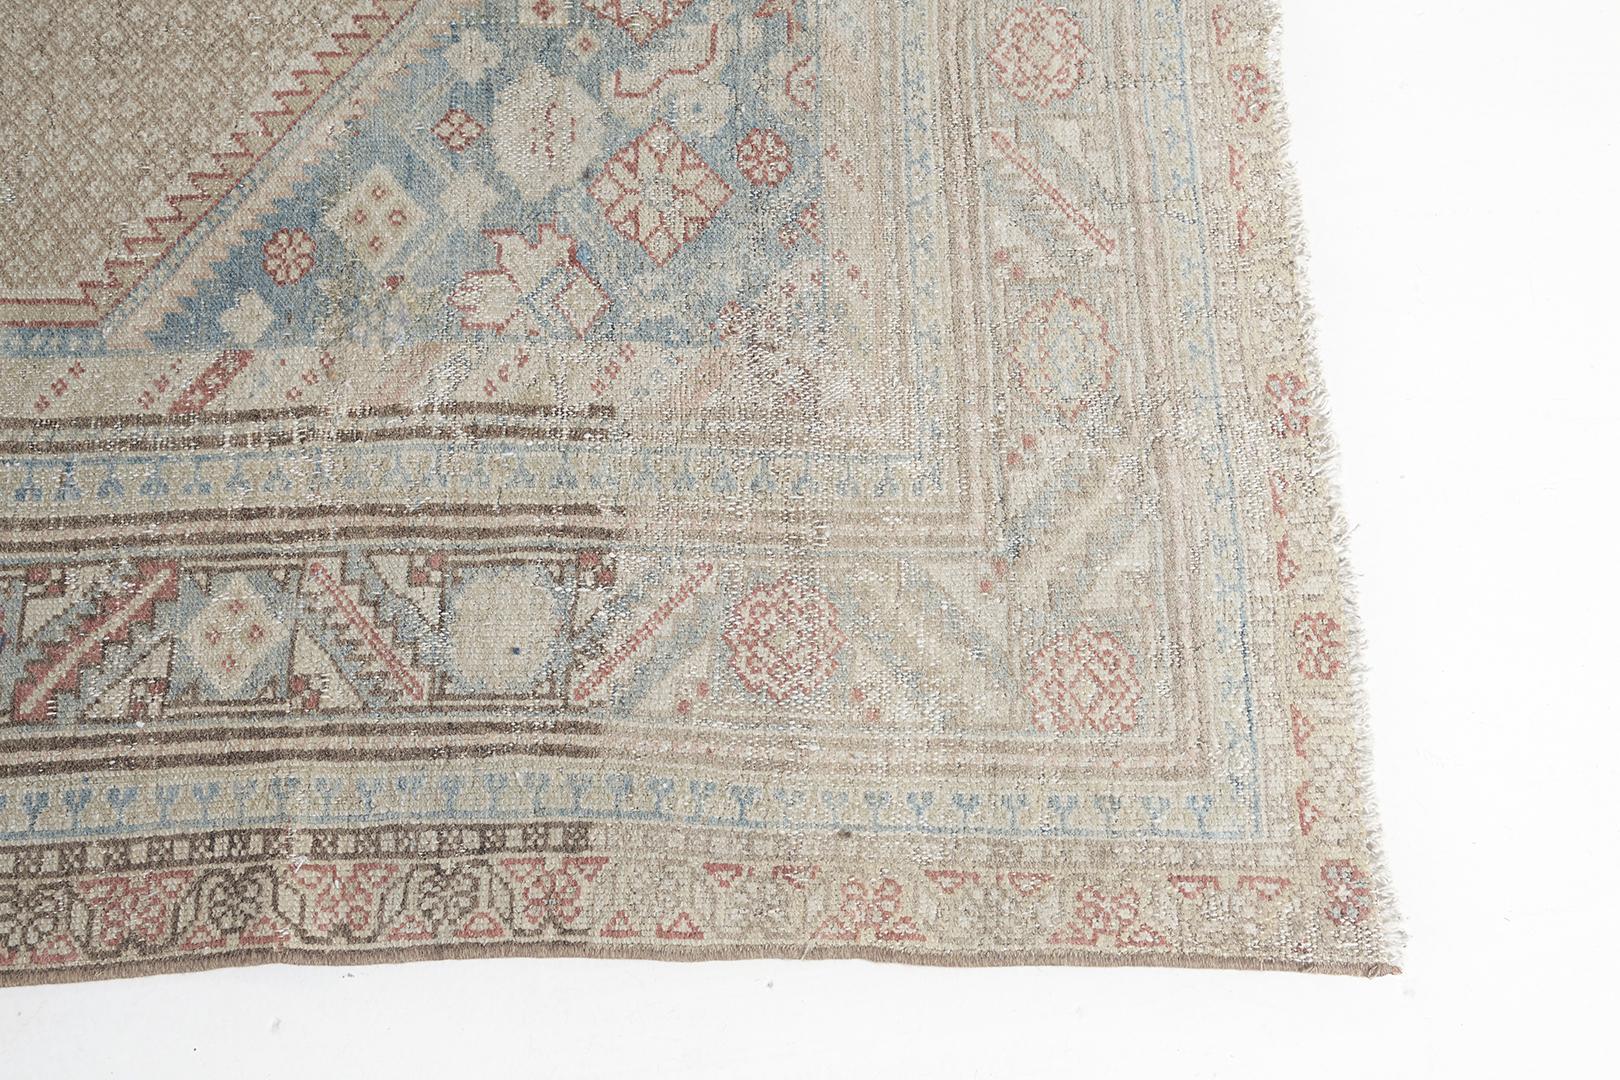 A magnificent Persian Malayer Runner that graces its dazzling design. Centrally focused in its intricate composition of lozenge medallions, this exhilirating rug features the muted tones of gold and cerulean blue. The attention to detail of this